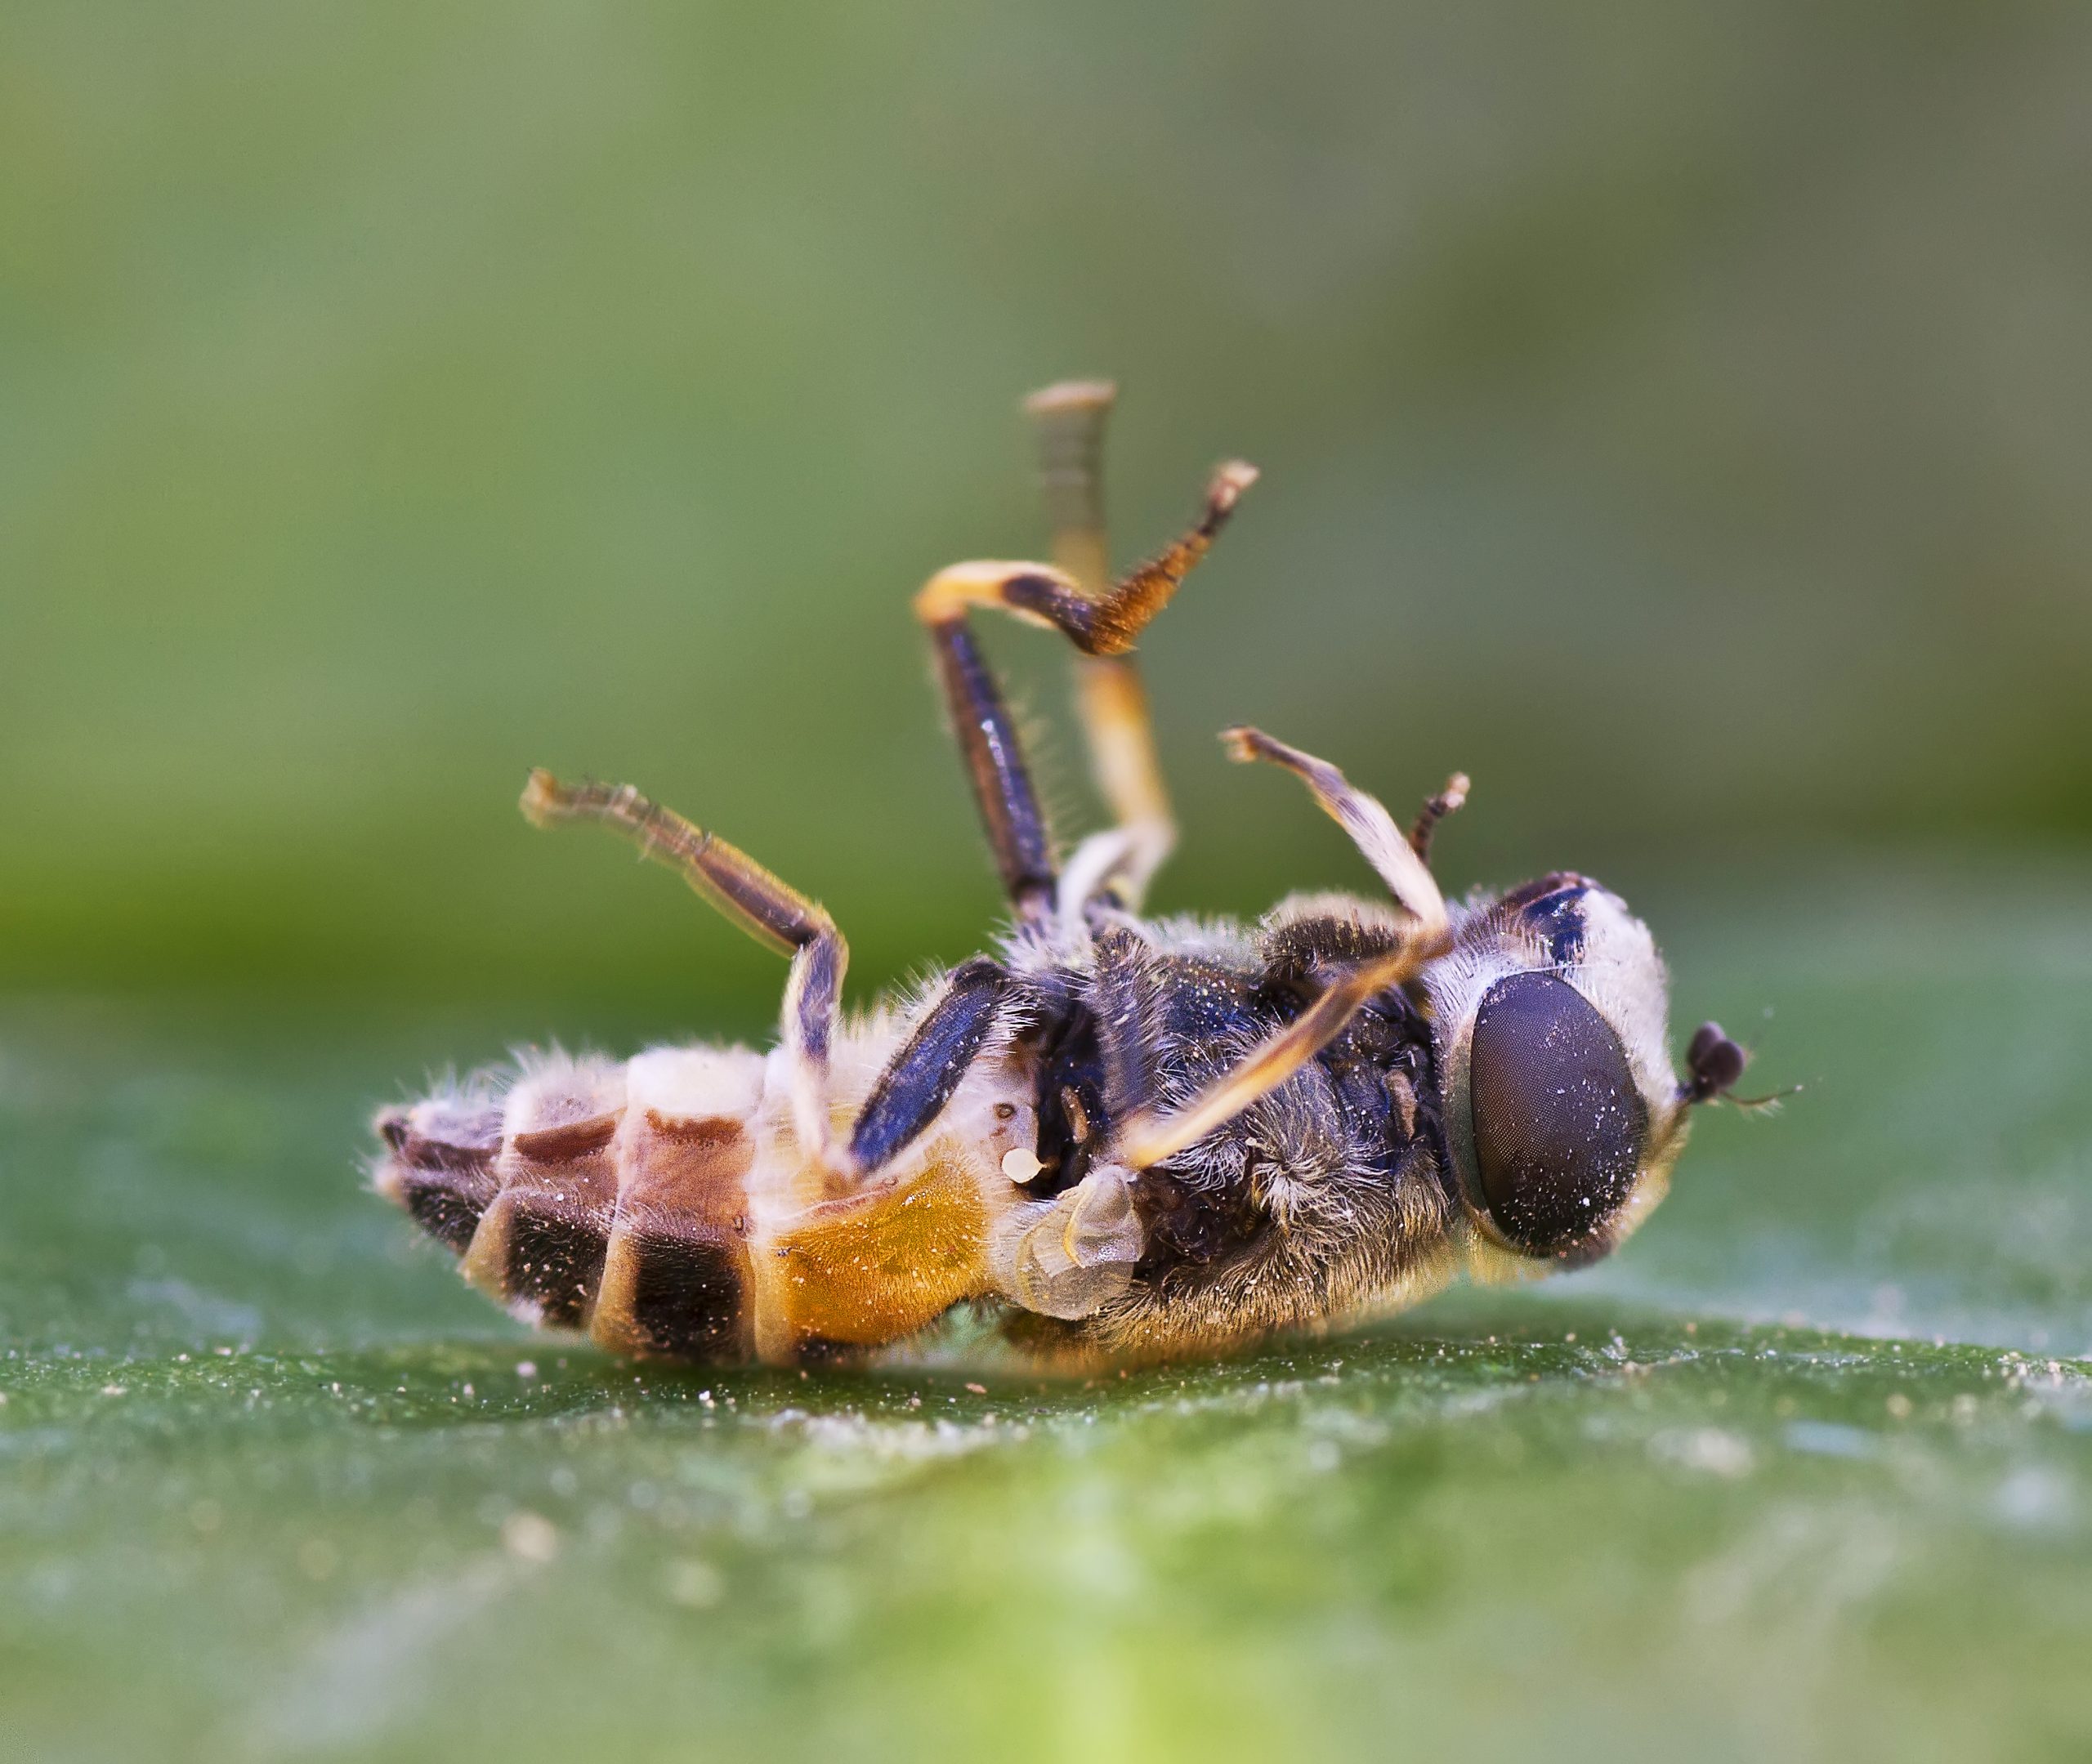 Pesticides Not the Only Thing Killing Honeybees